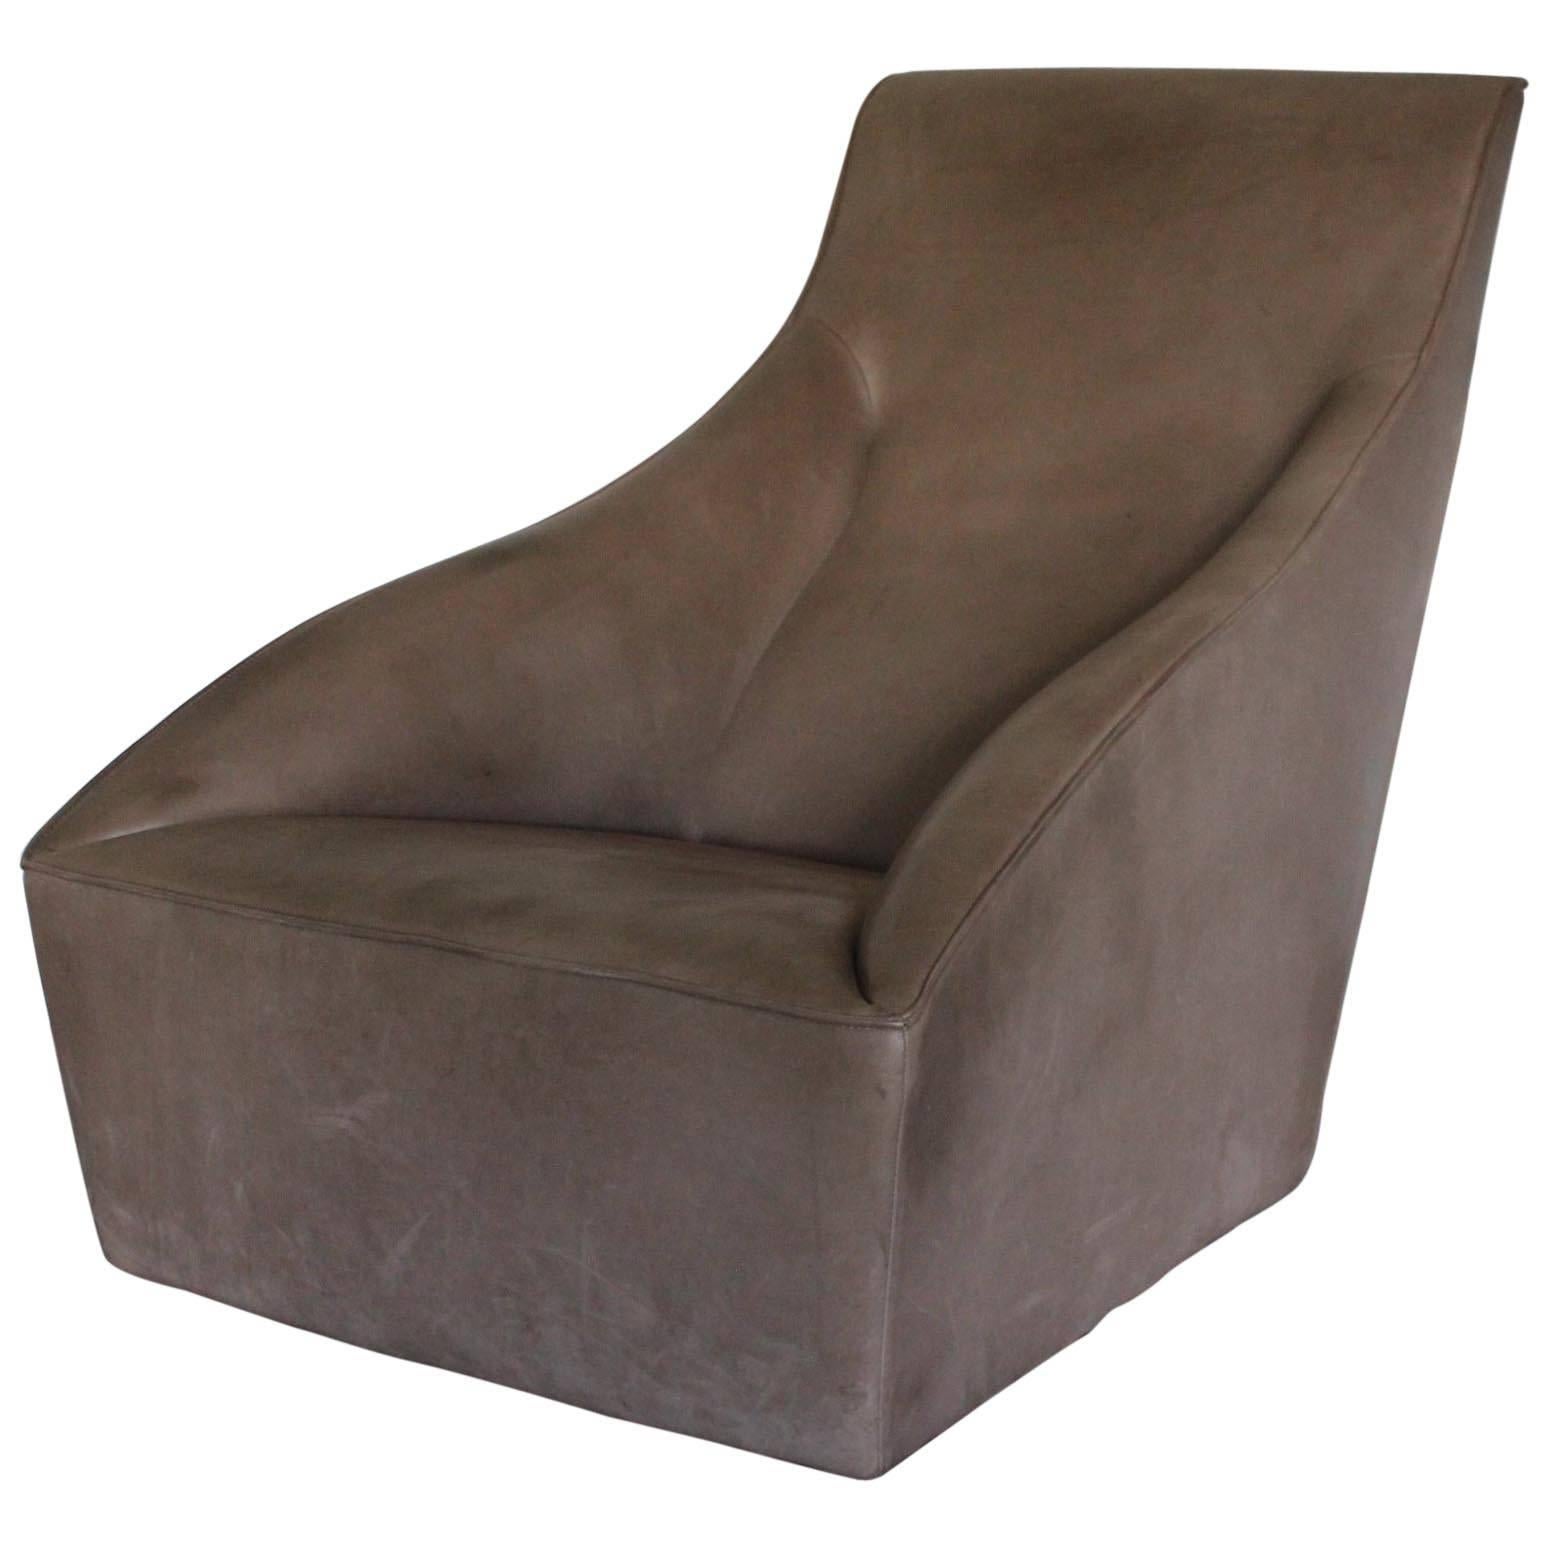 Molteni & C “Doda” Armchair in Pale Walnut-Brown Leather For Sale